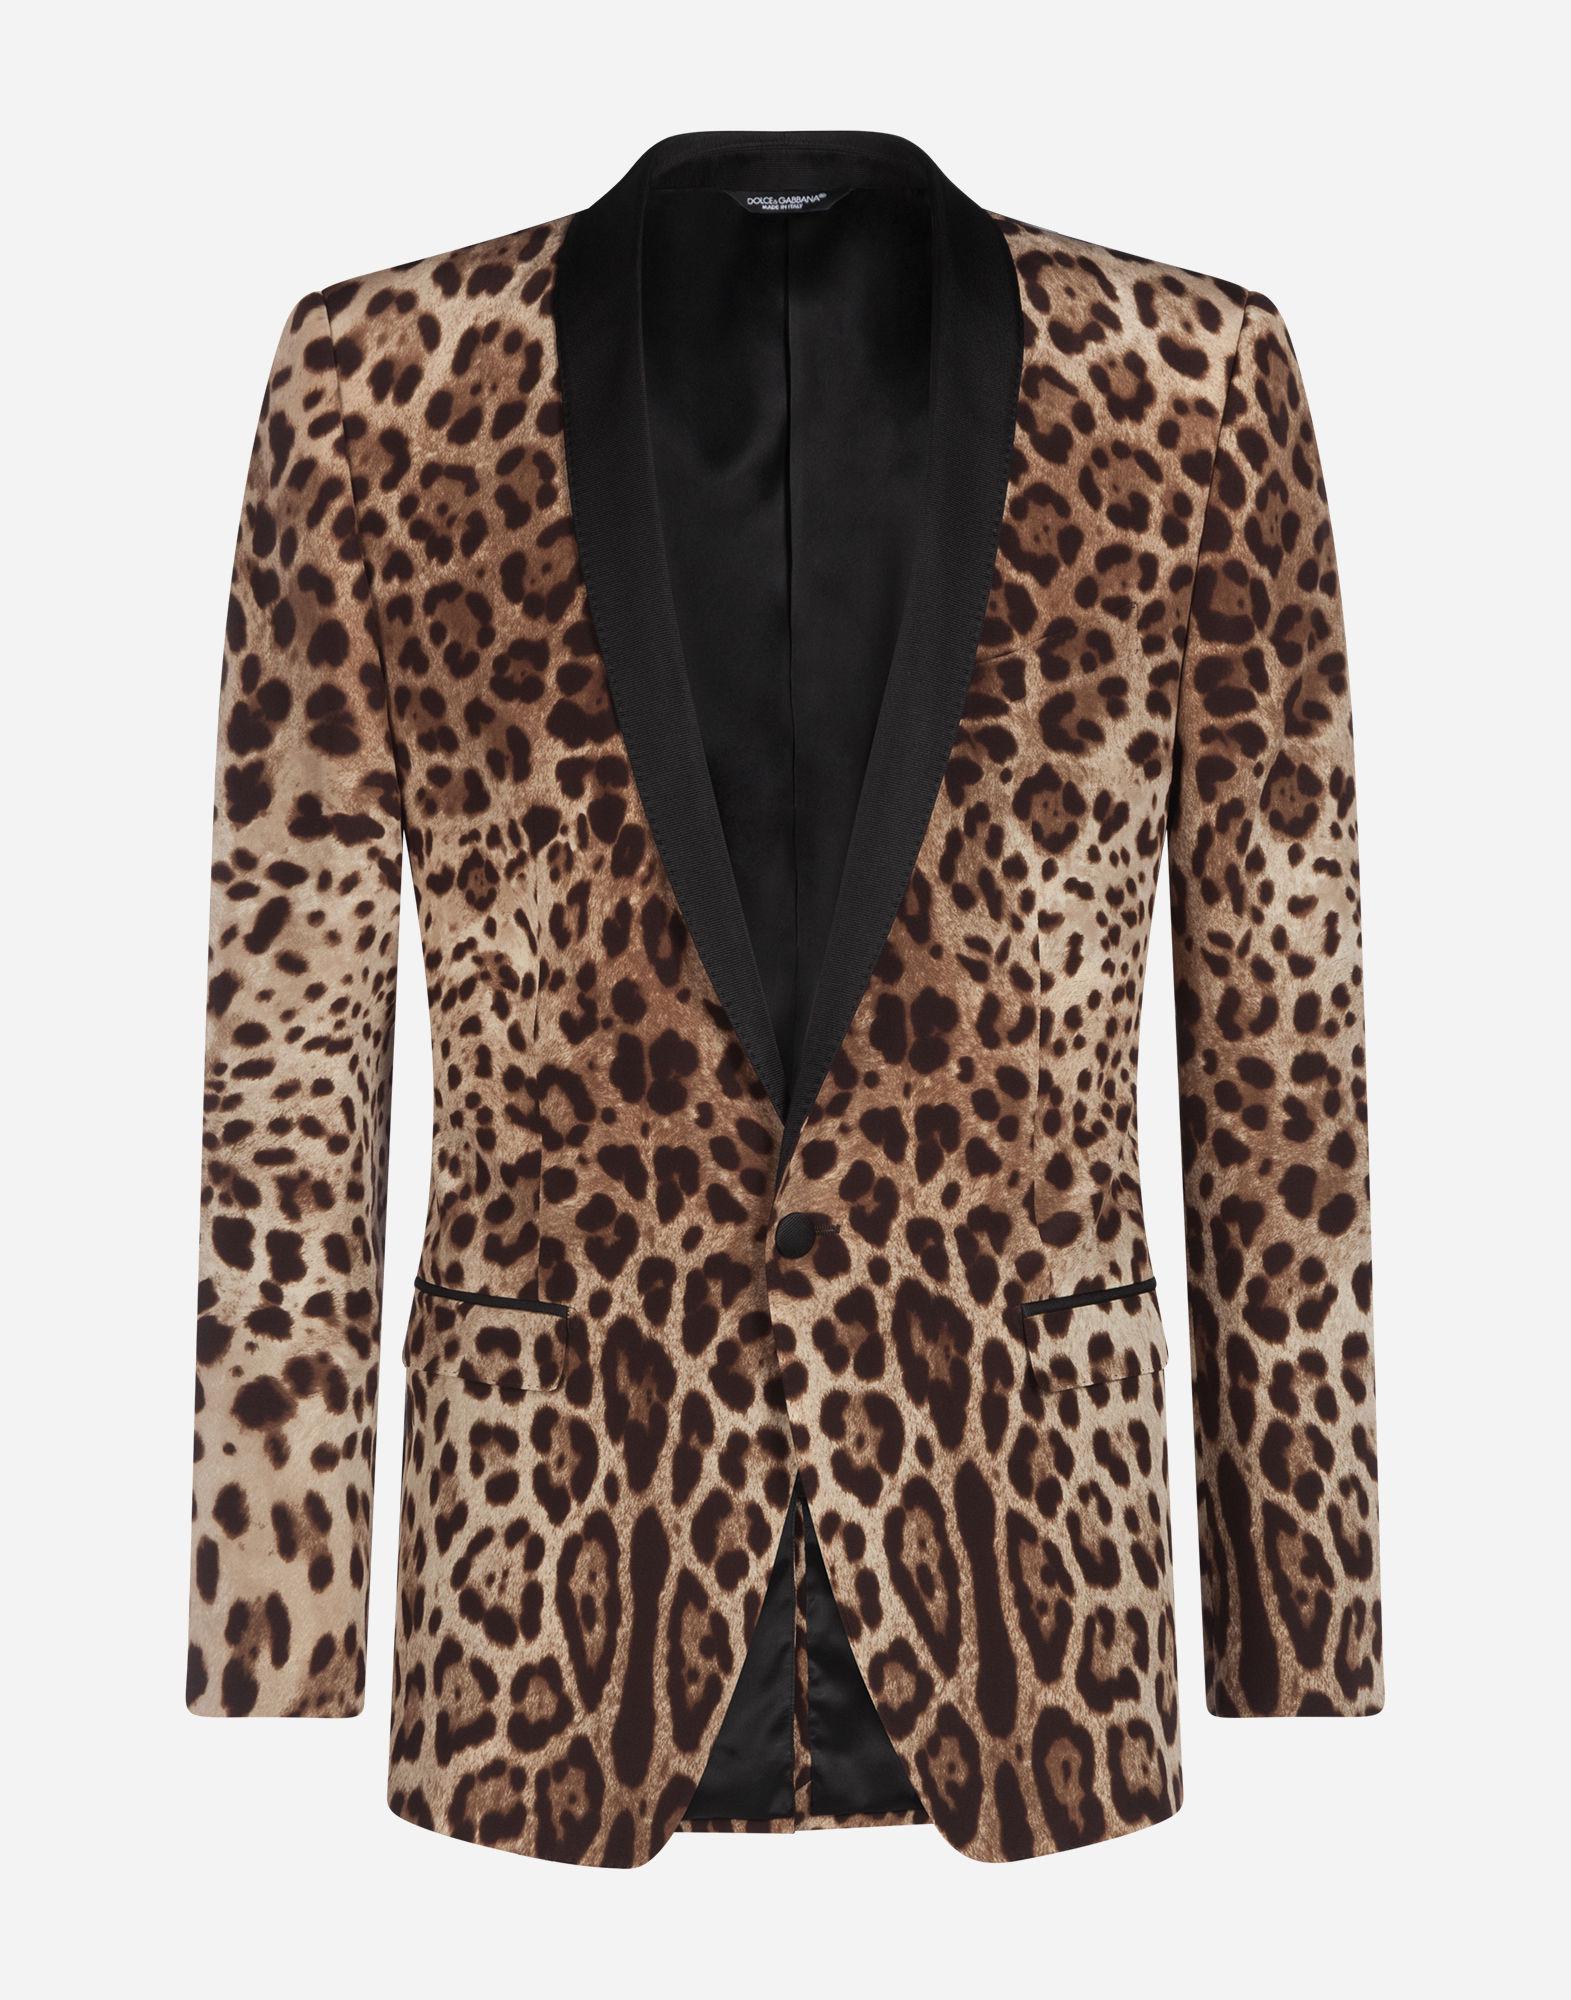 Dolce And Gabbana Single Breasted Jacket In Leopard Print Silk In Brown For Men Lyst 5869